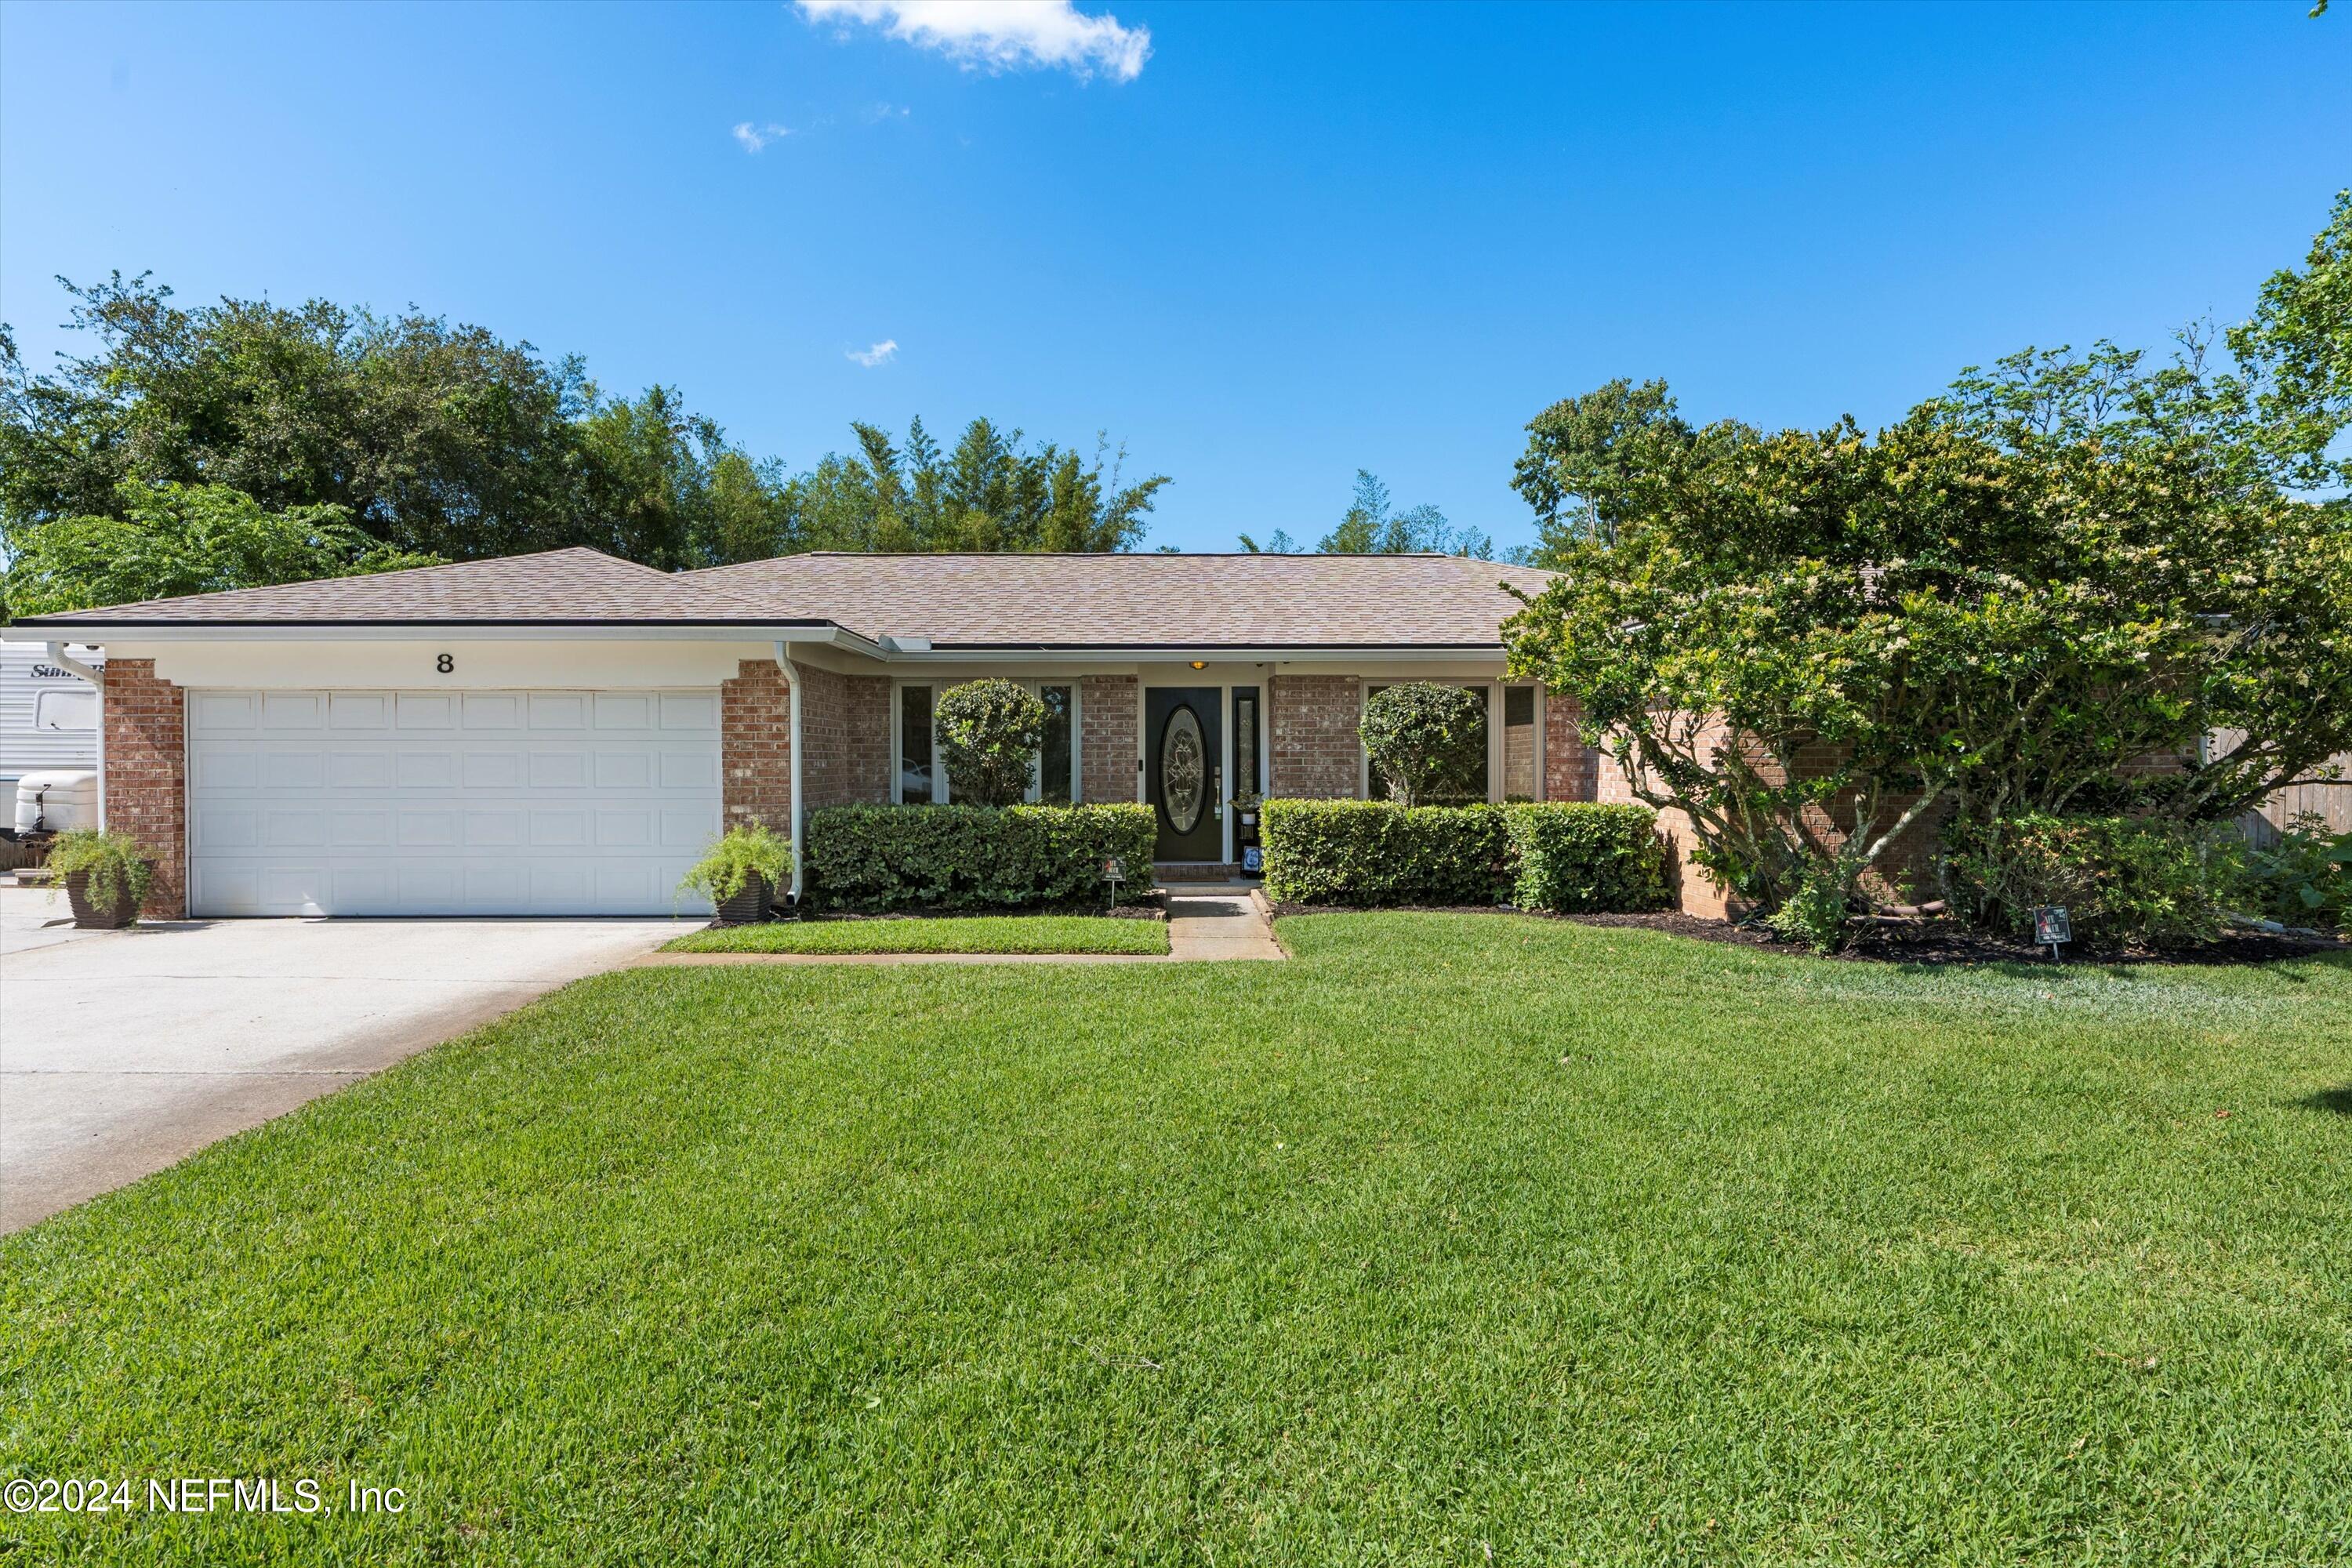 Ponte Vedra Beach, FL home for sale located at 8 Bluefish Place, Ponte Vedra Beach, FL 32082